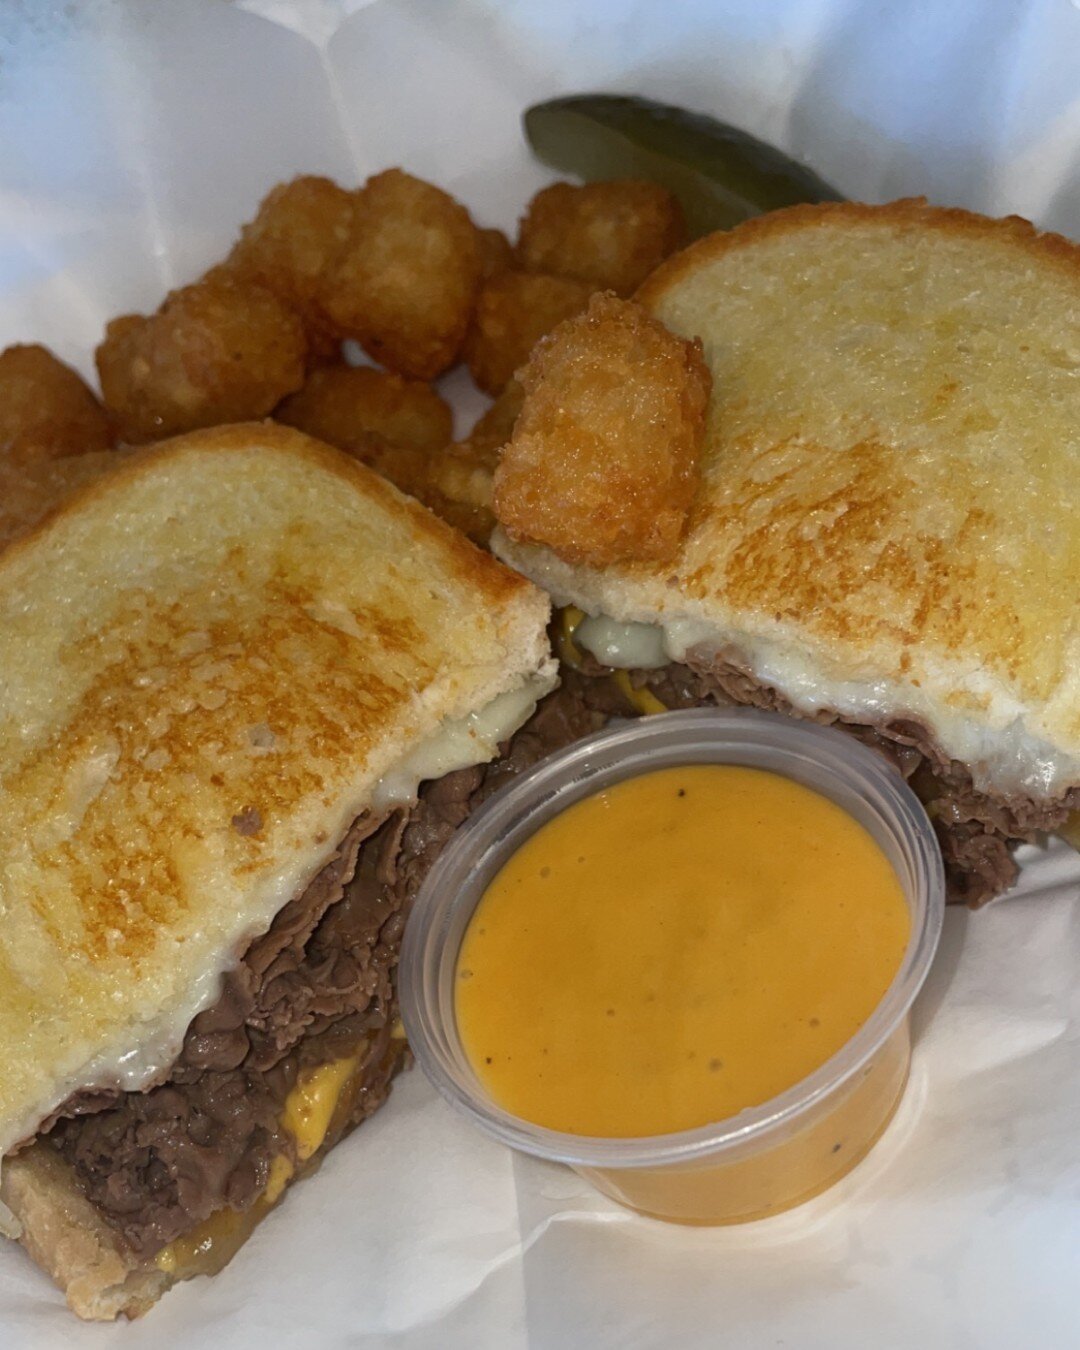 Wednesday's special is the Dirty Rob: grilled Texas Toast stacked with Italian beef, provolone and American cheese, and saut&eacute;ed mushrooms and onions. Served with a side of tots and cheese with a pickle!

#vinnies #stl #eatstl #foodie #stlouisf